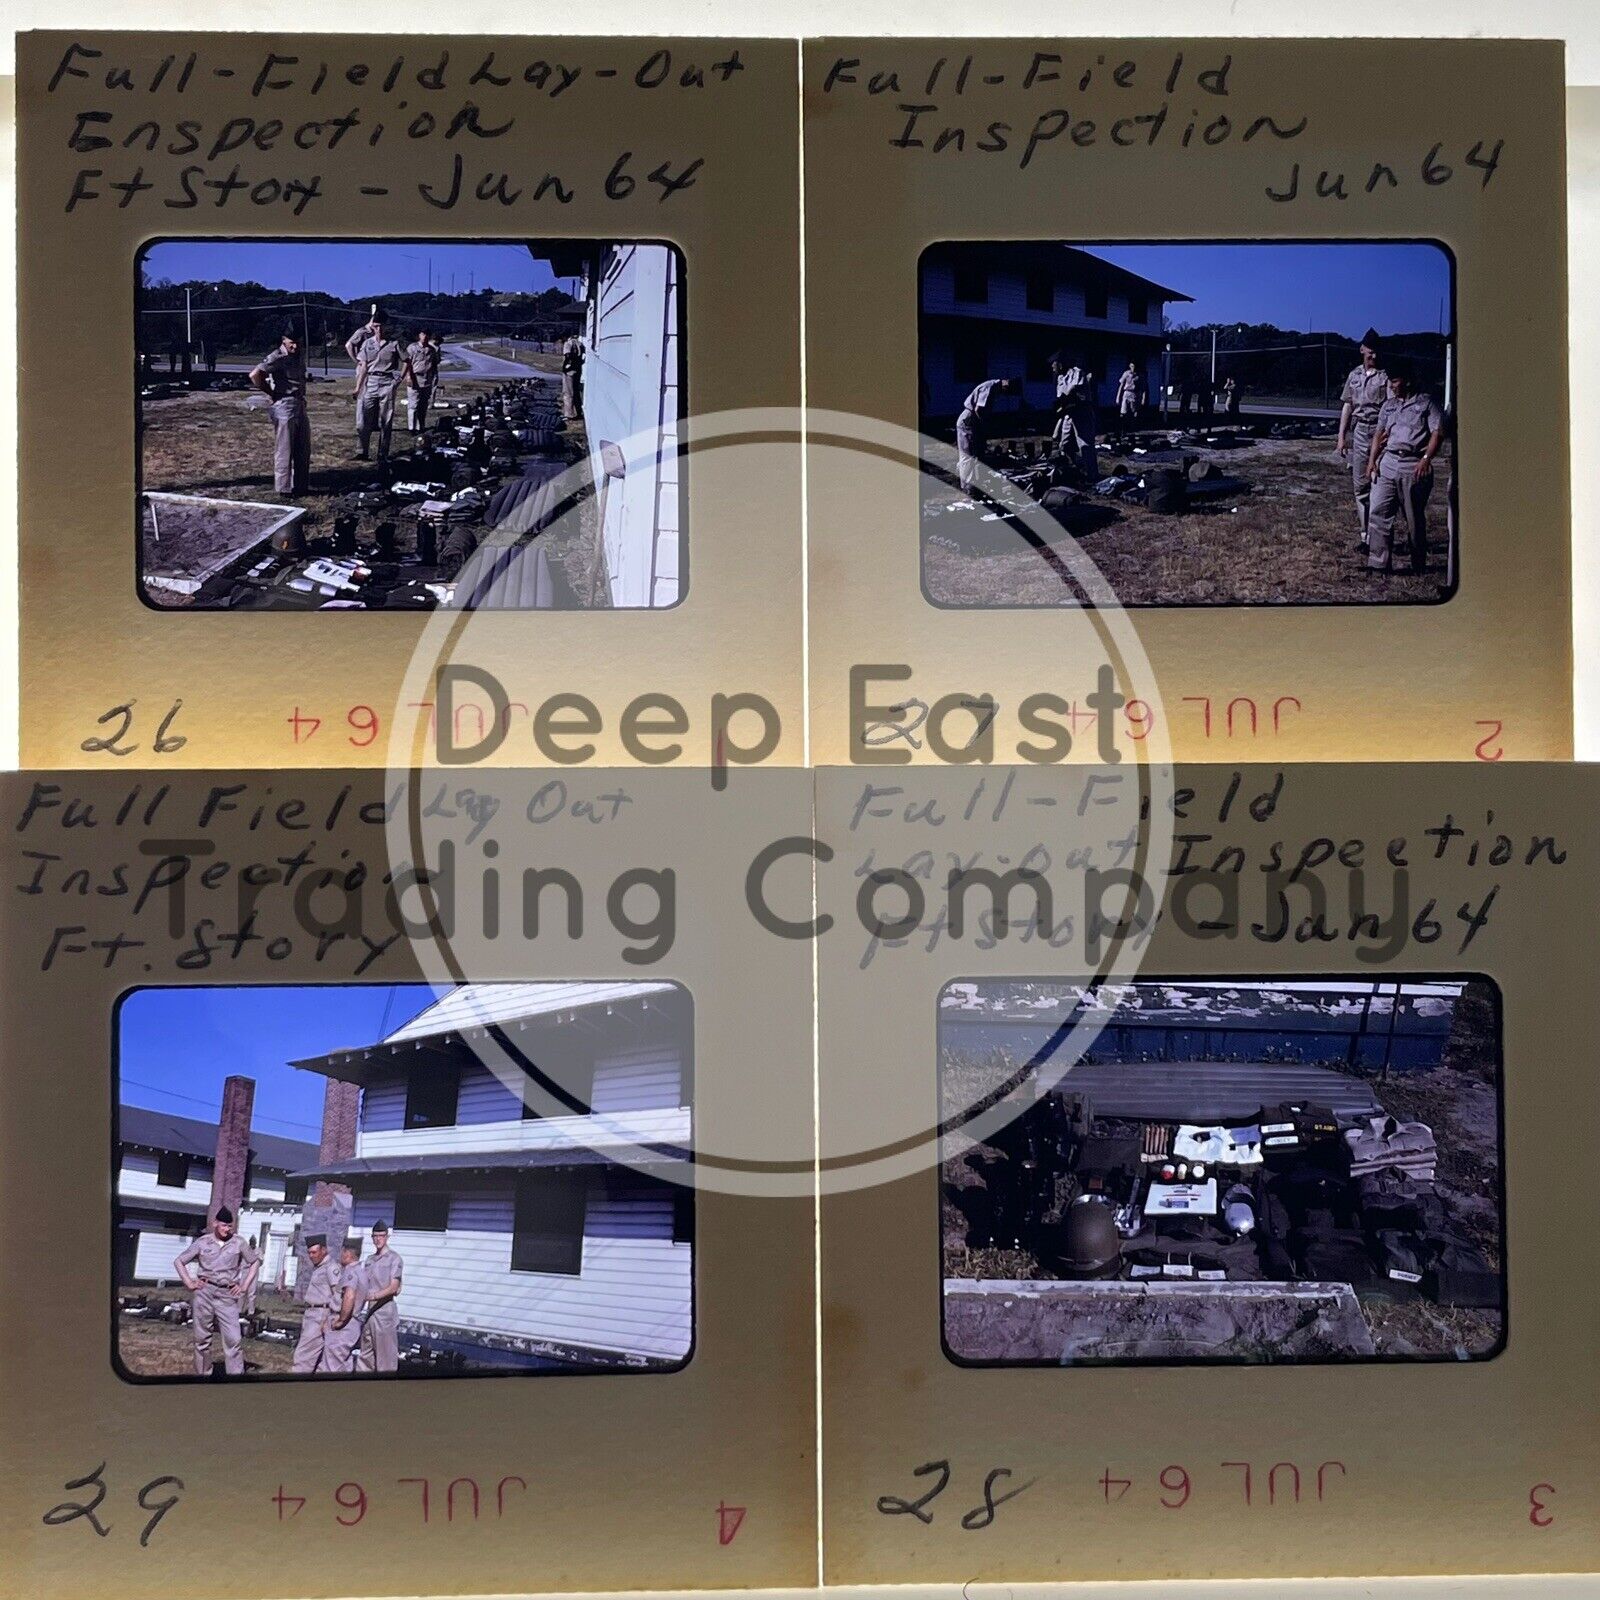 Vintage 35mm Slides Fort Story Full Field Lay Out Inspection July 1964